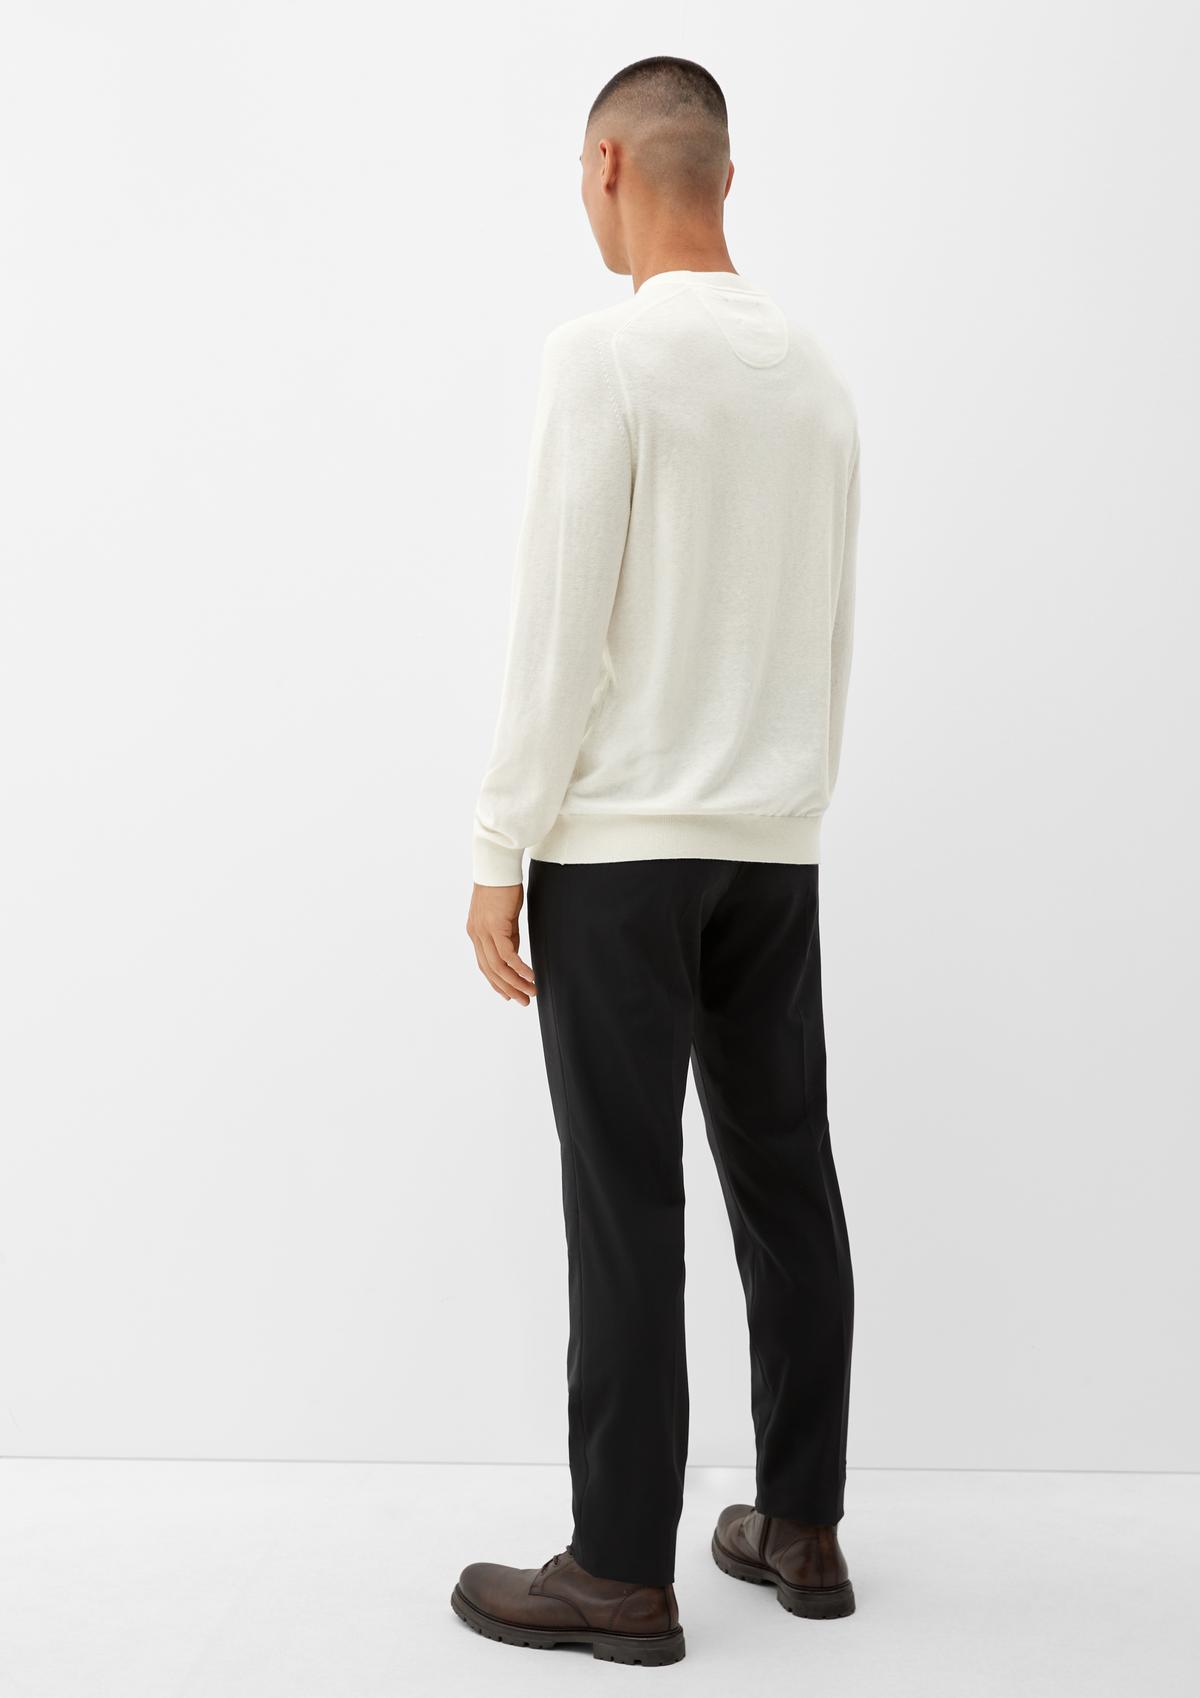 s.Oliver Jumper with merino wool